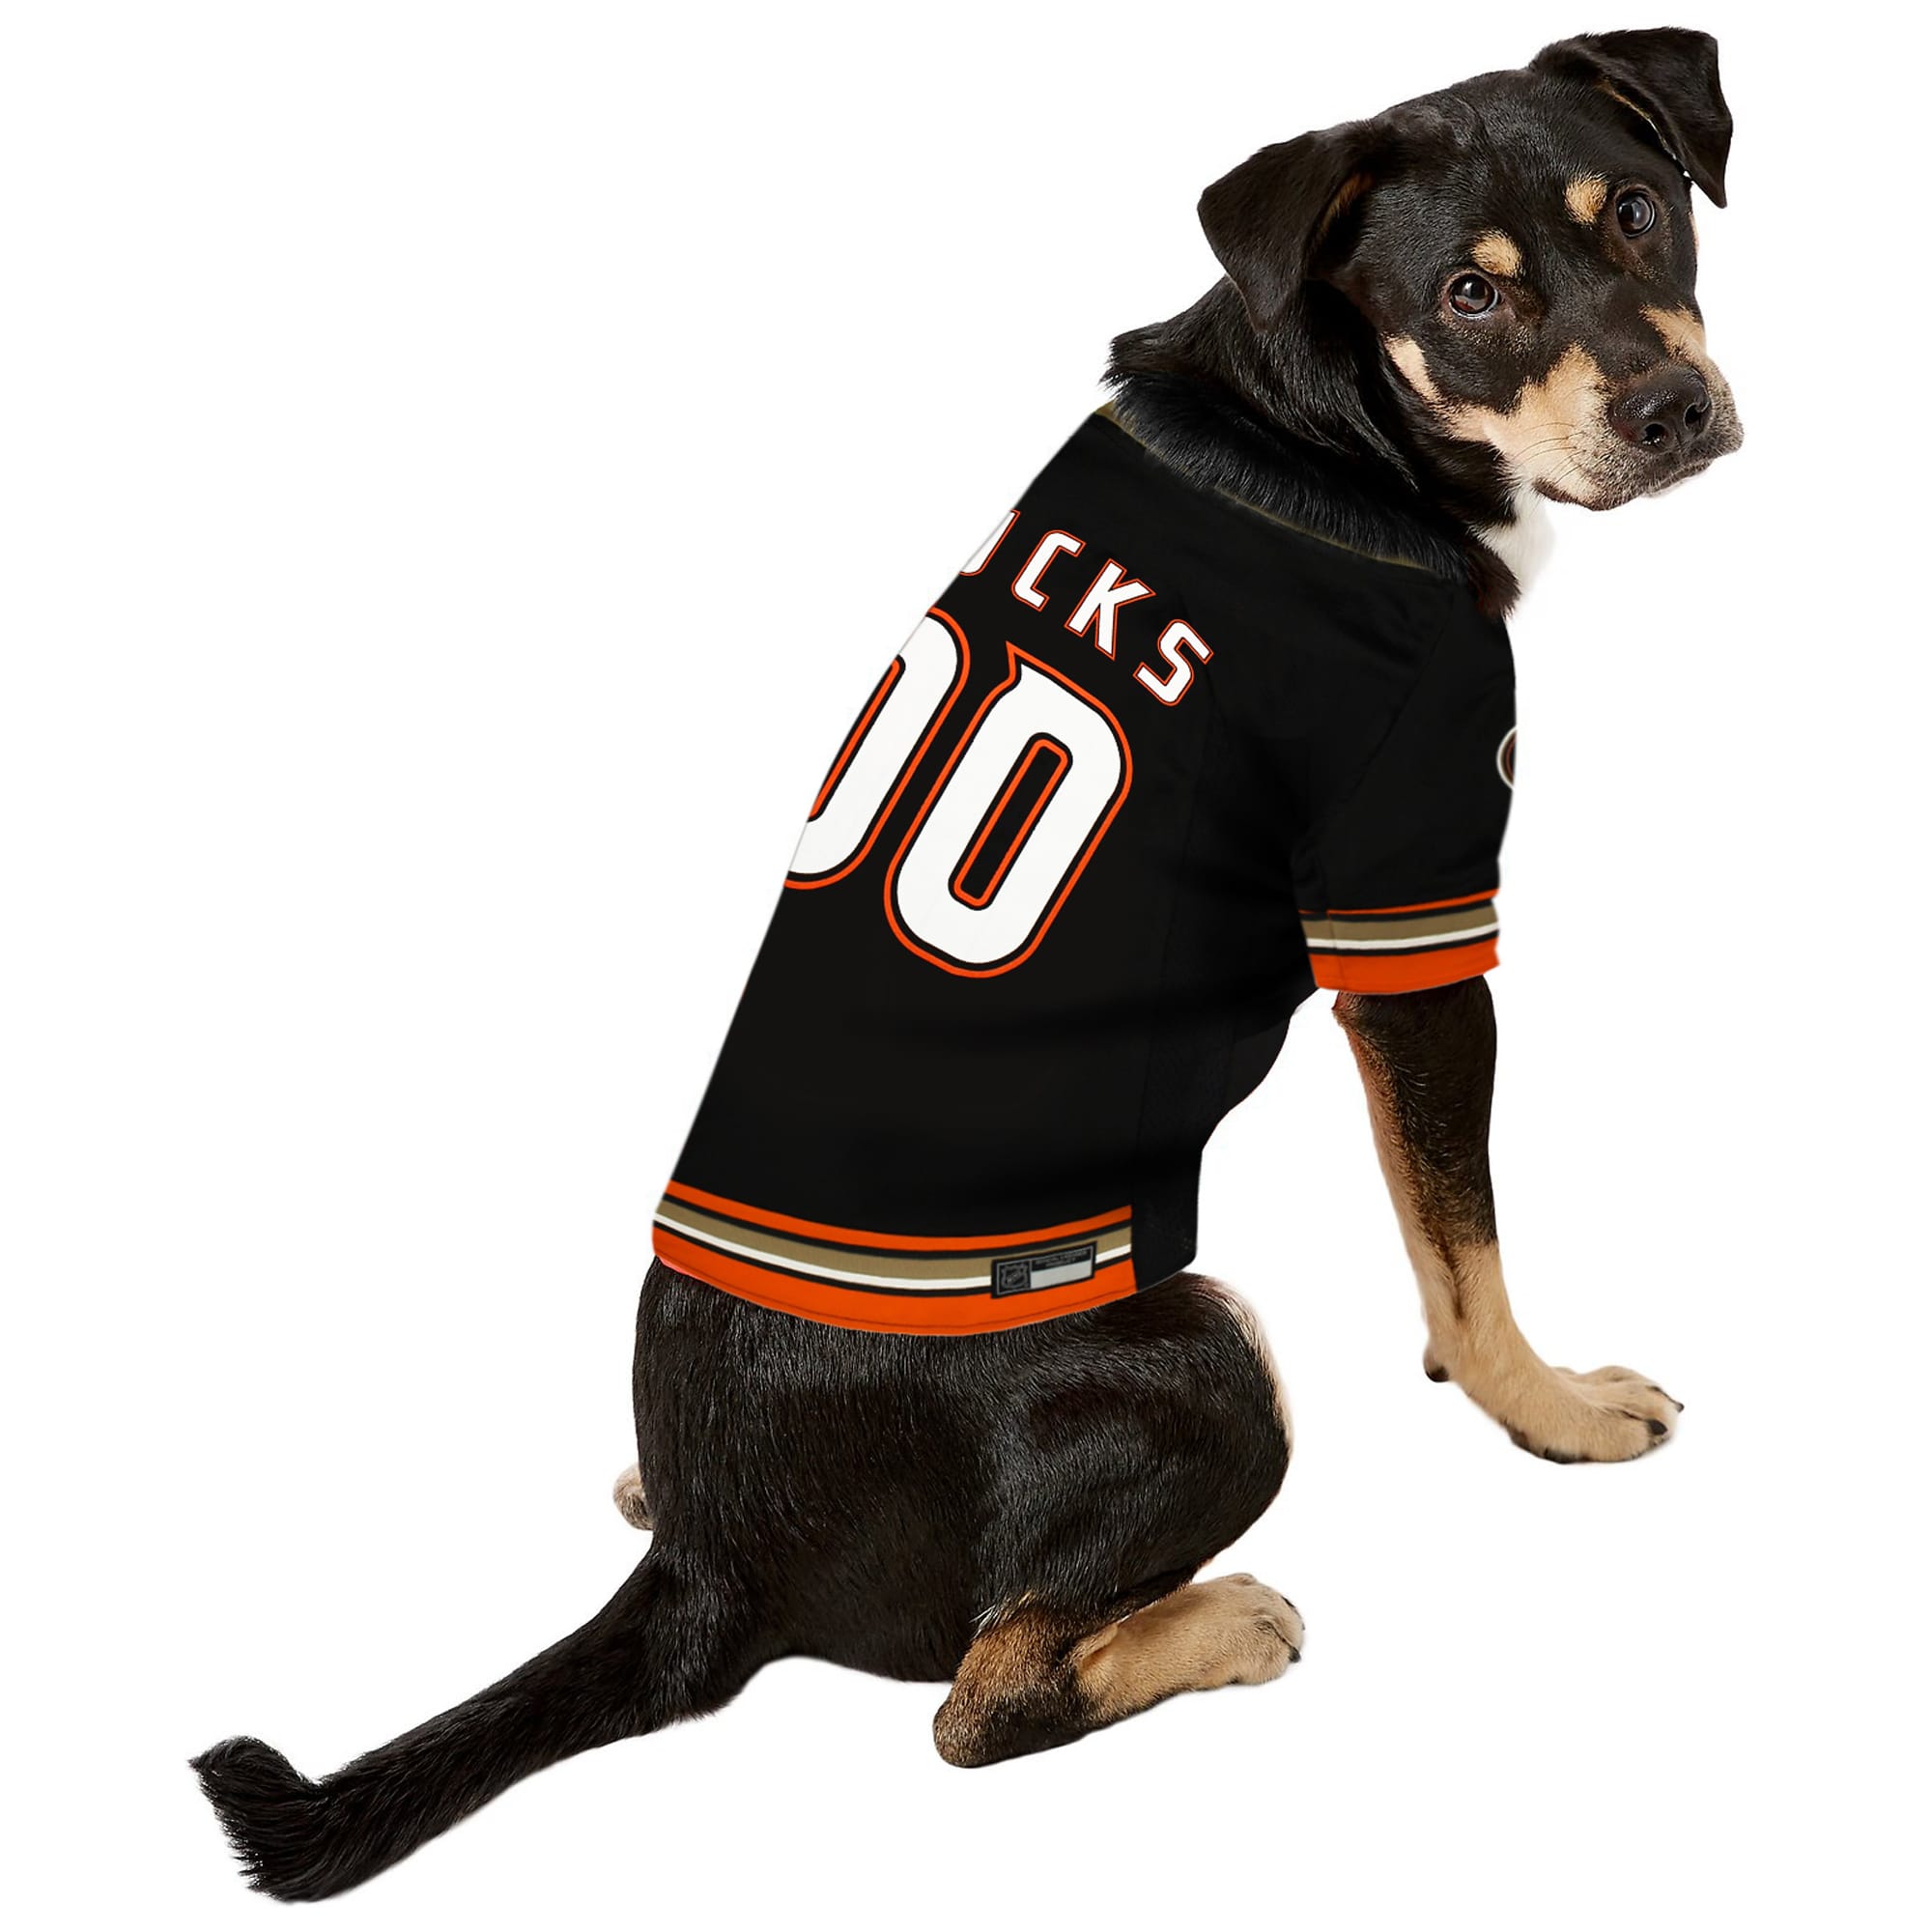 Anaheim Ducks And Zombie For Fans Polo Shirts - Peto Rugs